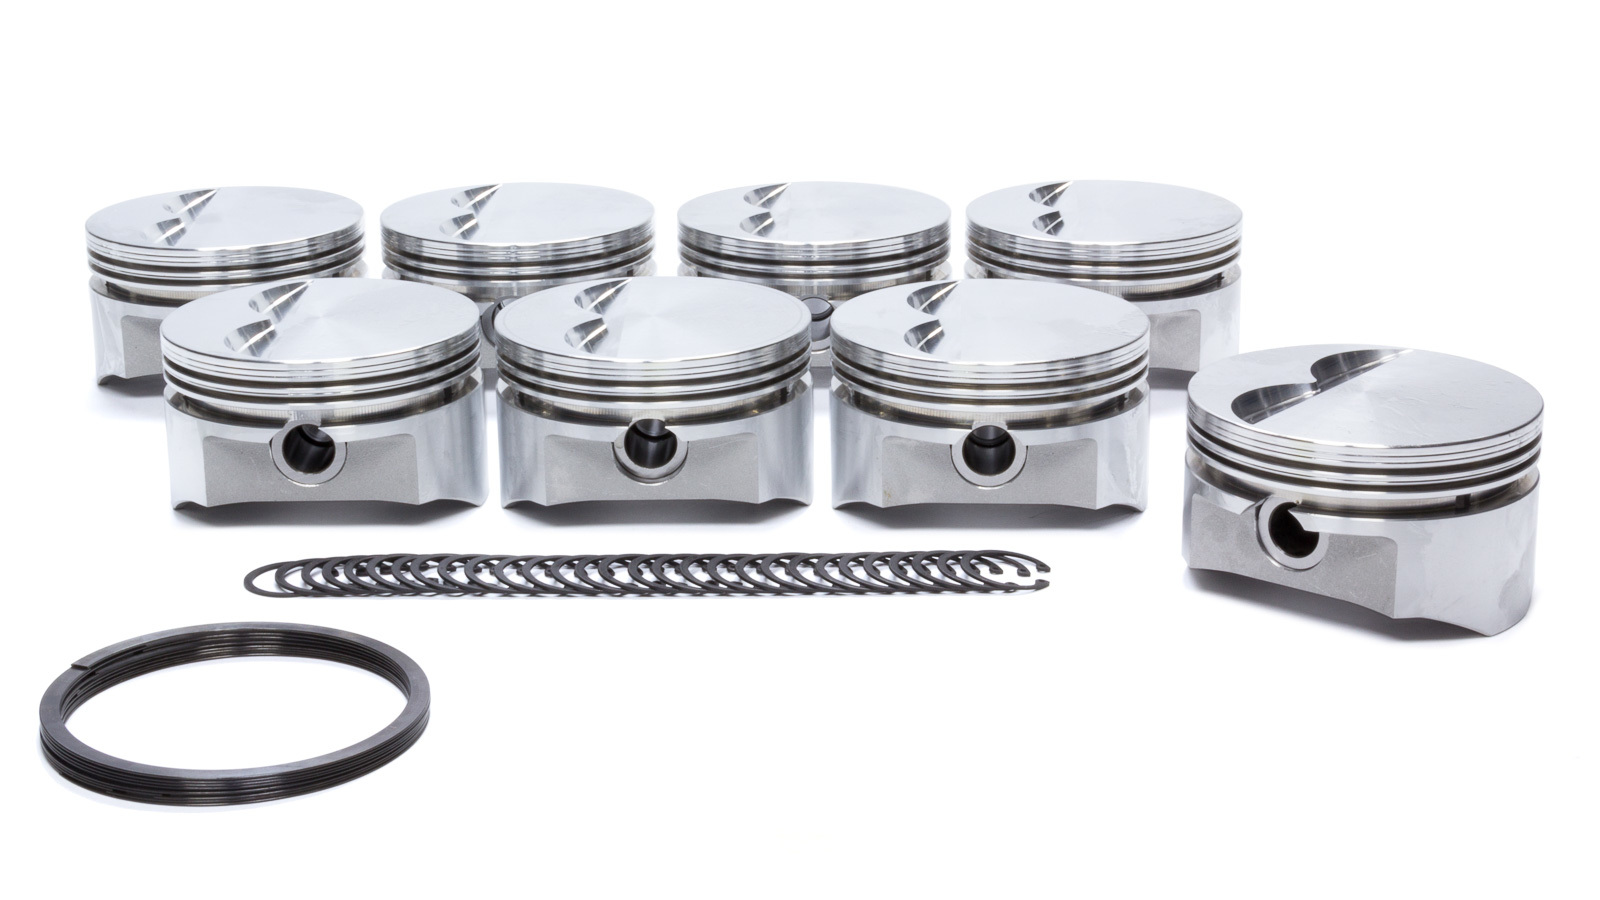 DSS Racing 8705-4030 Piston, E Series, Forged, 4.030 in Bore, 5/64 x 5/64 x 3/16 in Ring Grooves, Minus 5.00 cc, Small Block Chevy, Set of 8